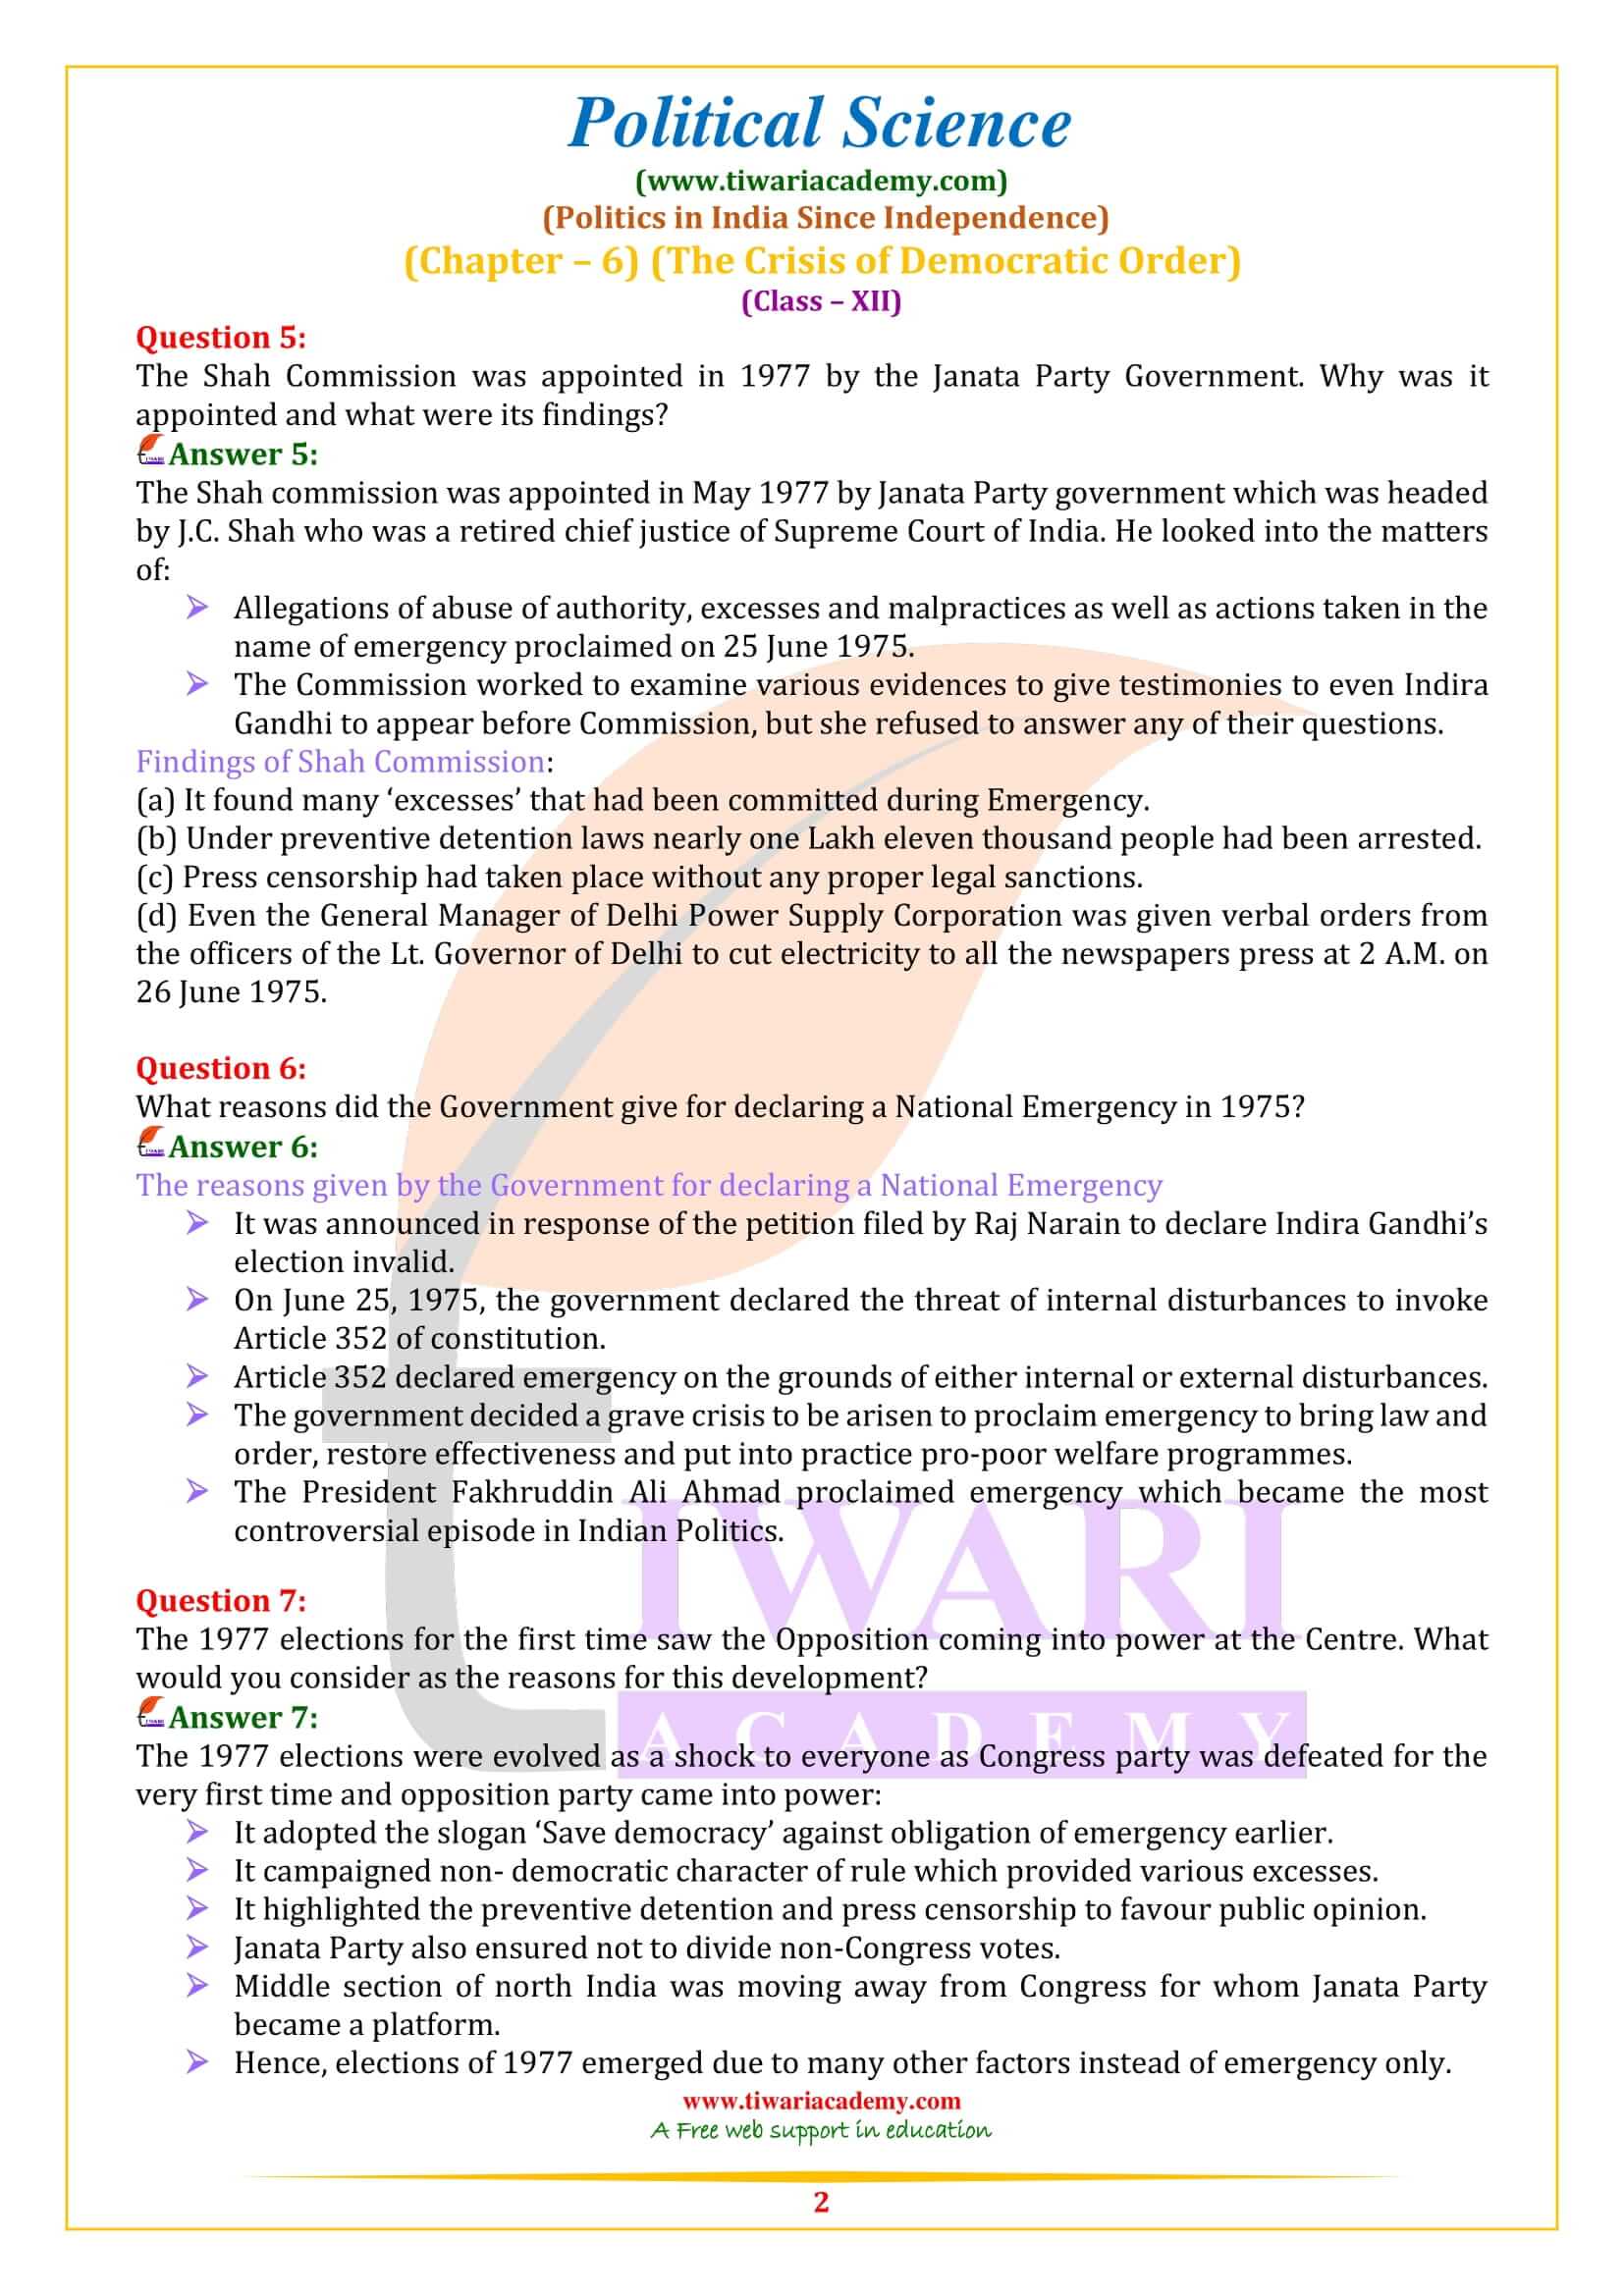 NCERT Solutions for Class 12 Political Science Part 2 Chapter 6